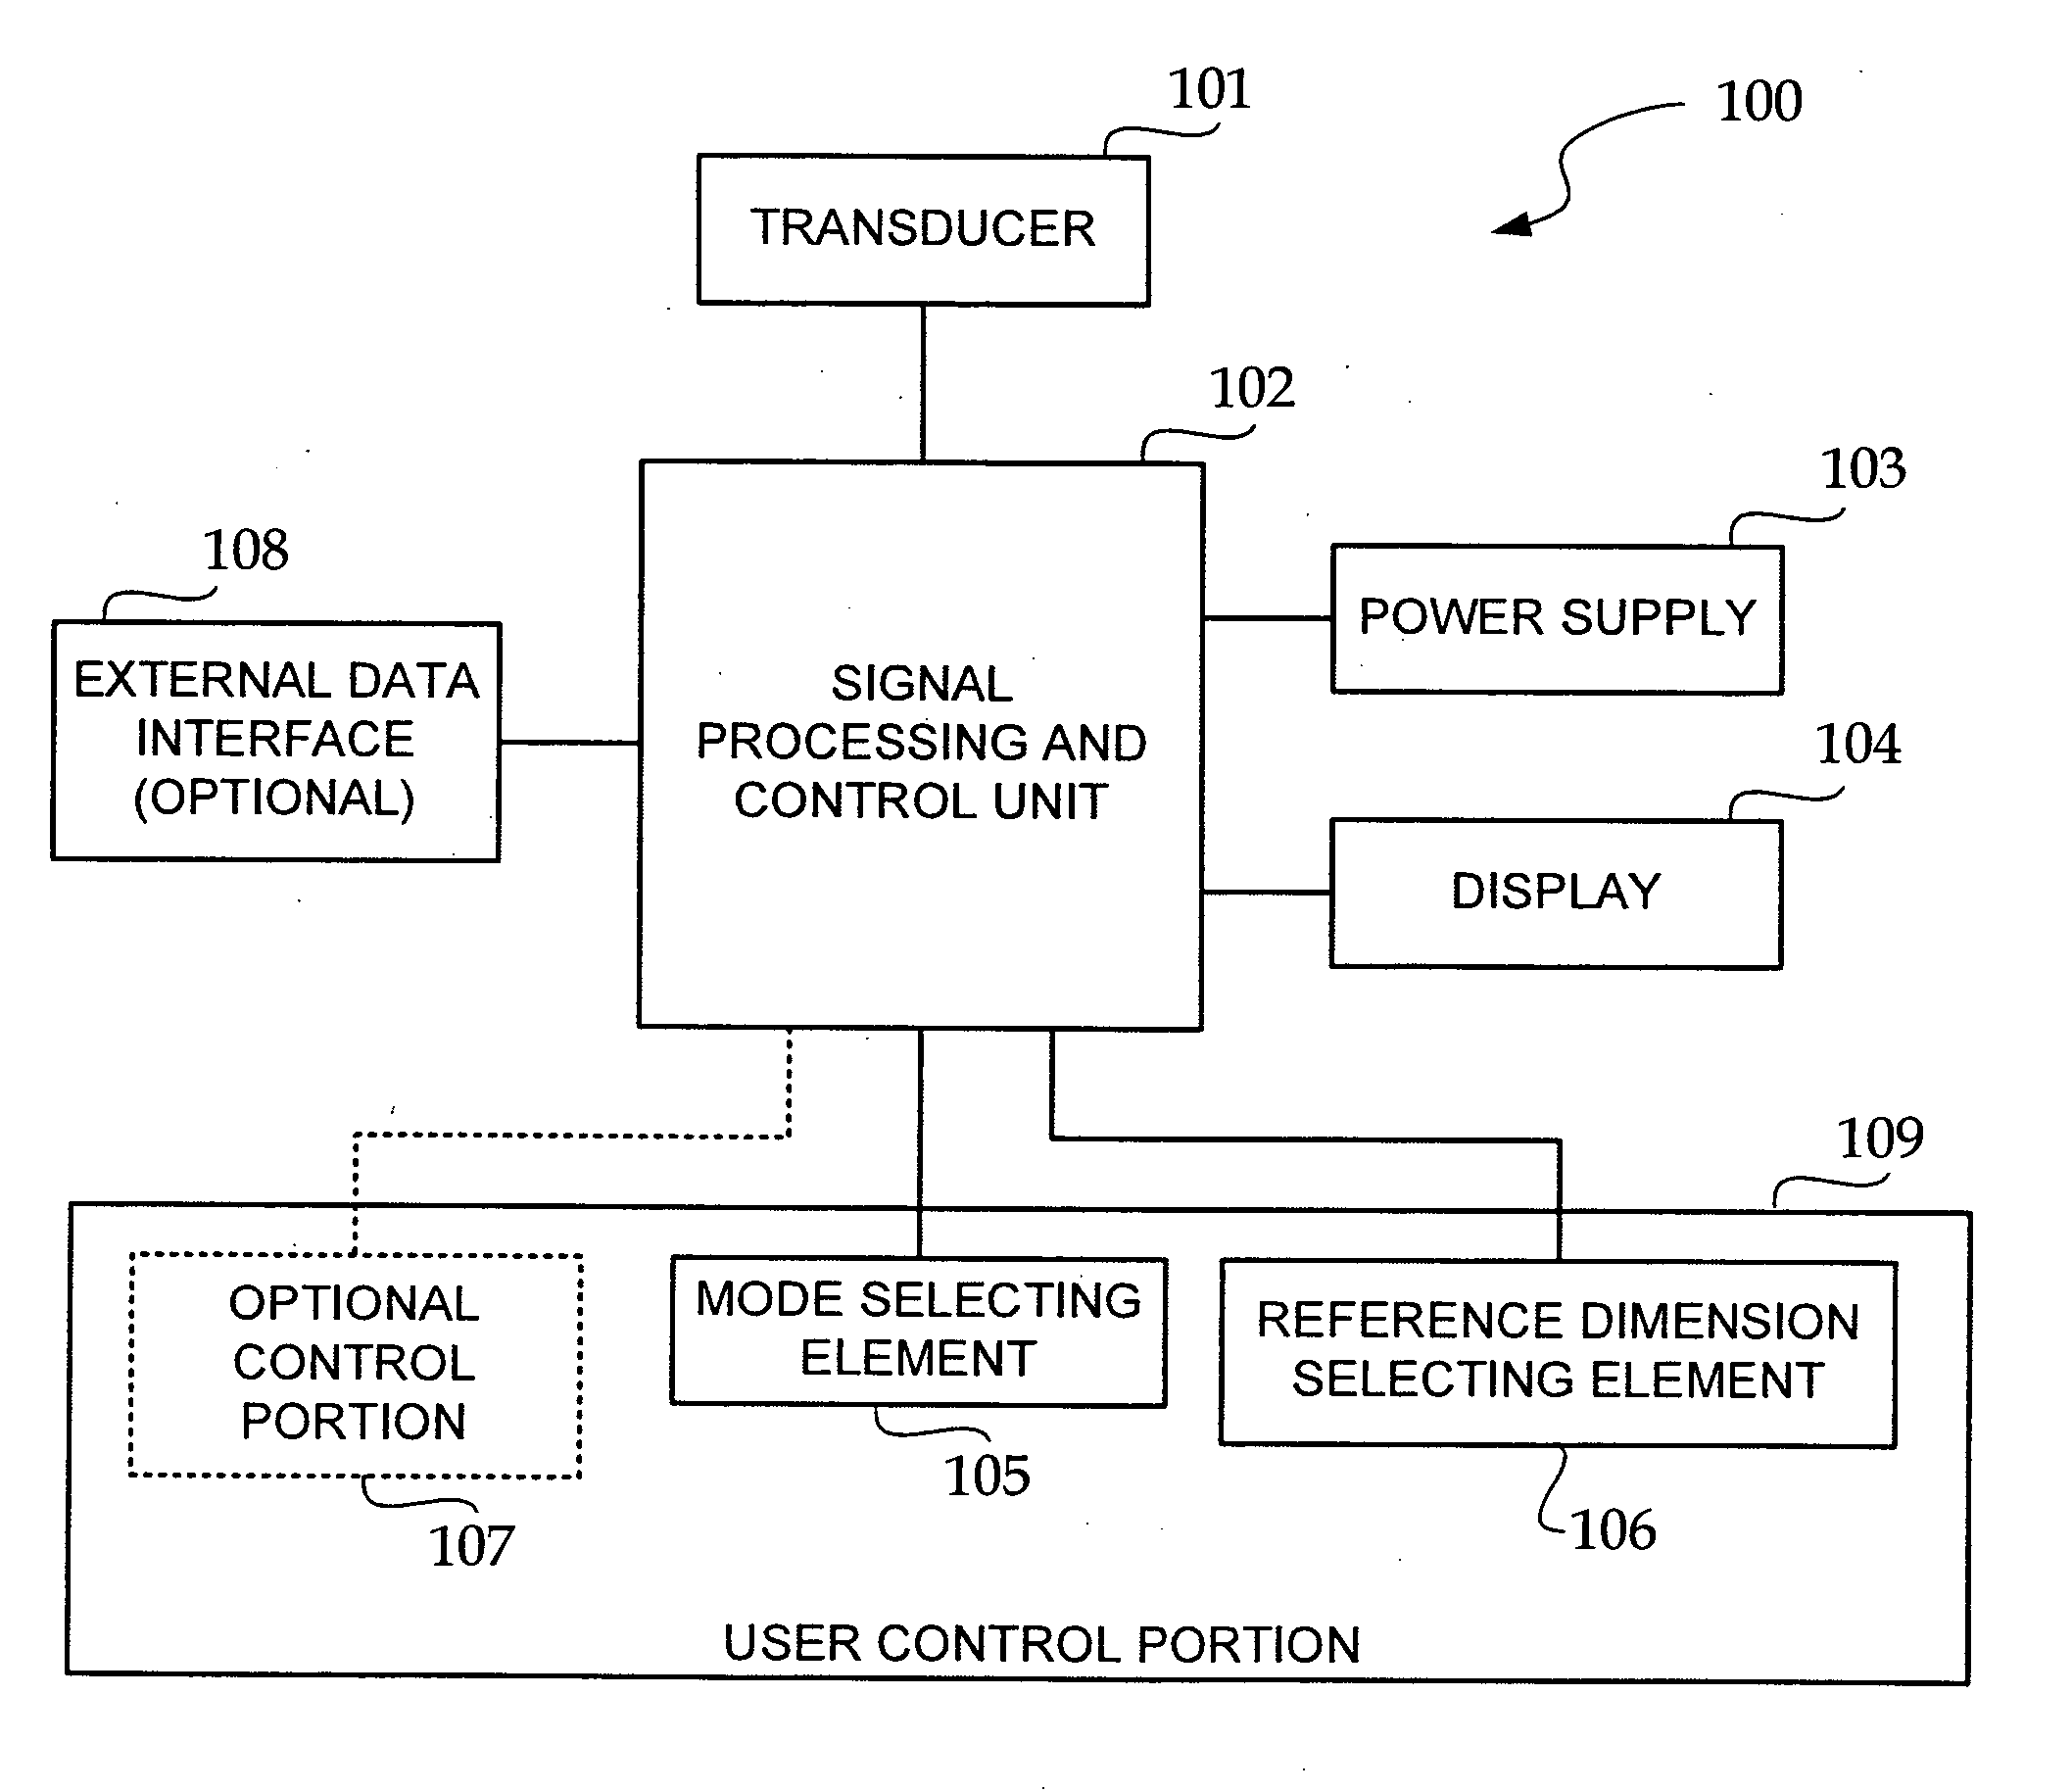 Multimode electronic calipers having ratiometric mode and simplified user interface